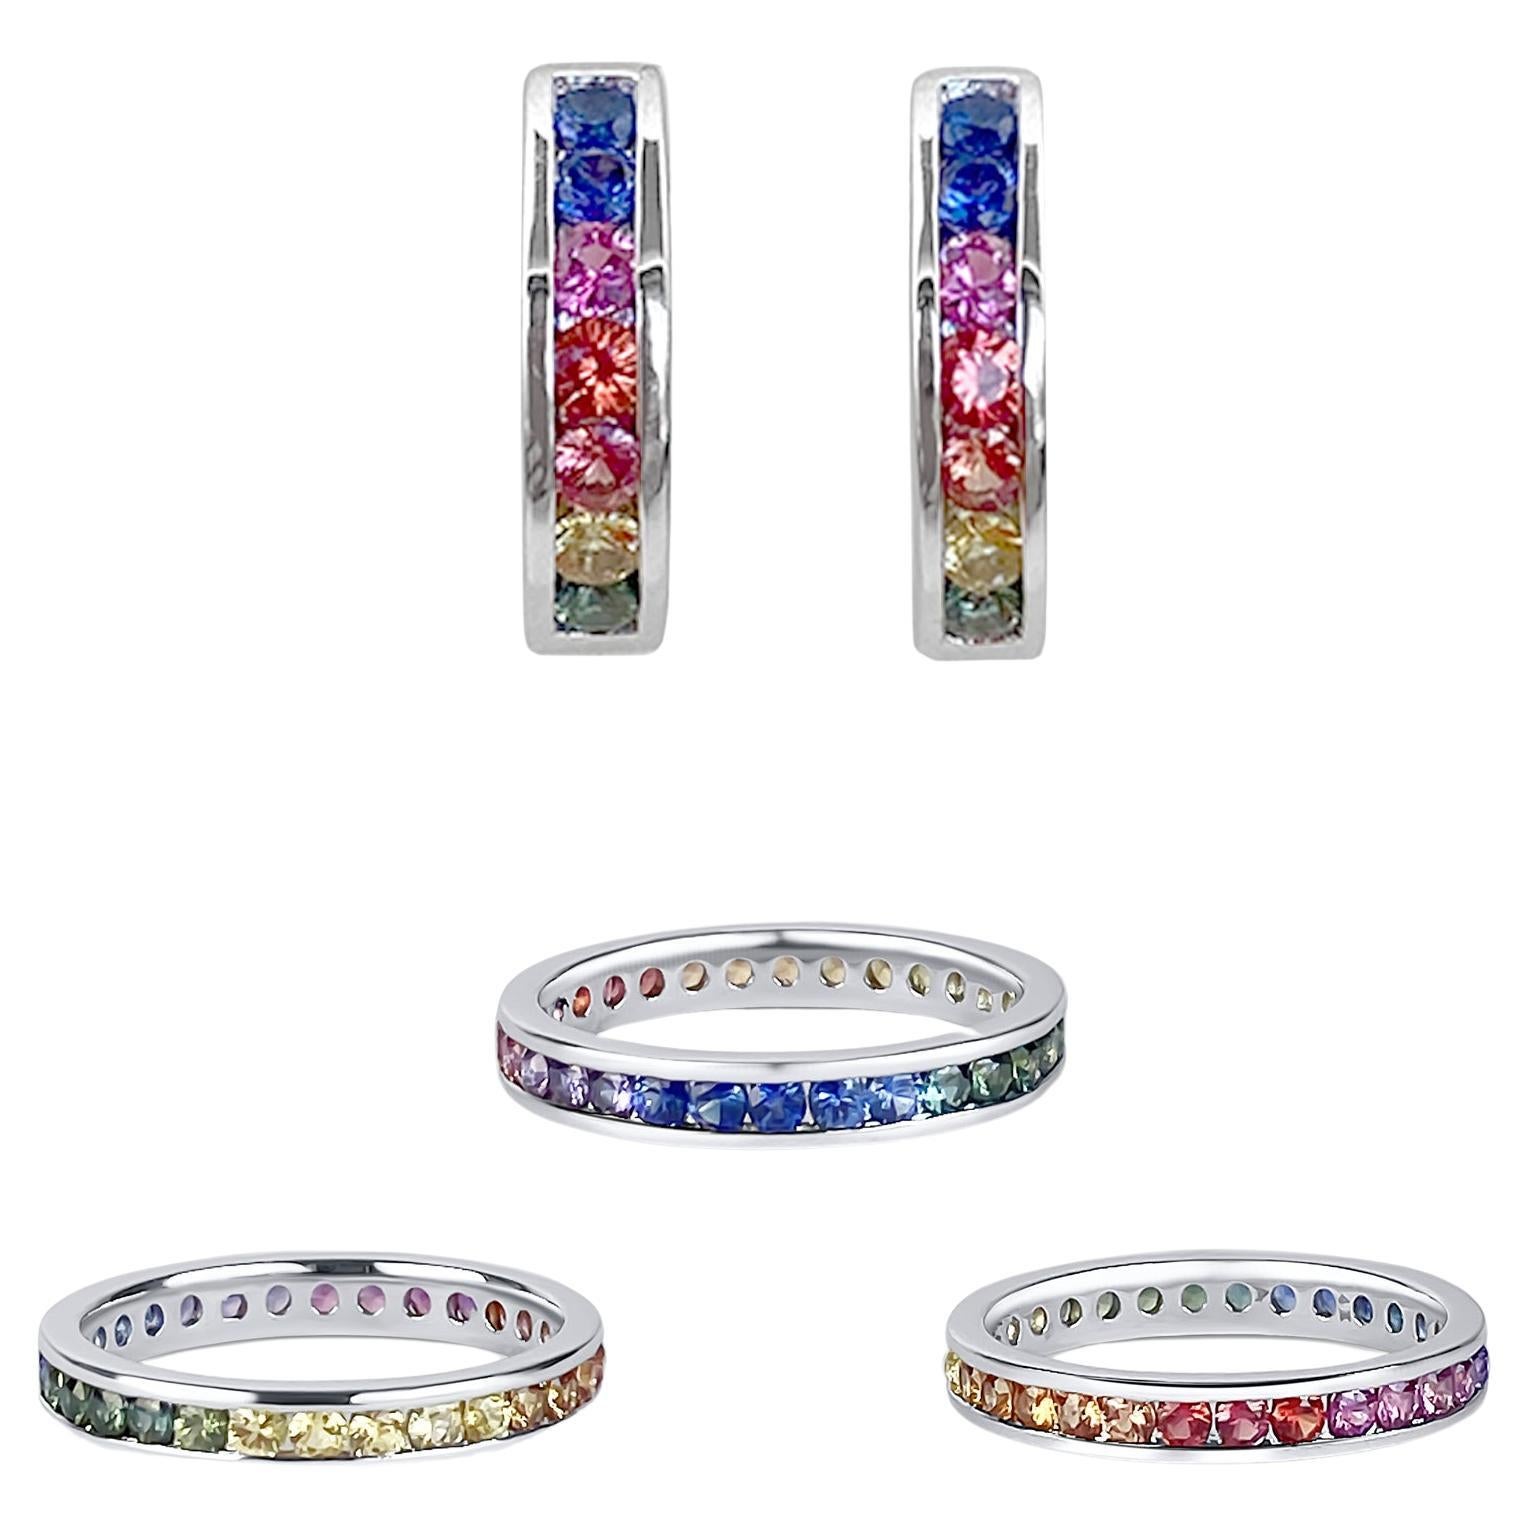 1.74 Carat Rainbow Color Natural Ceylon Sapphire Ring and Earrings Set  For Sale